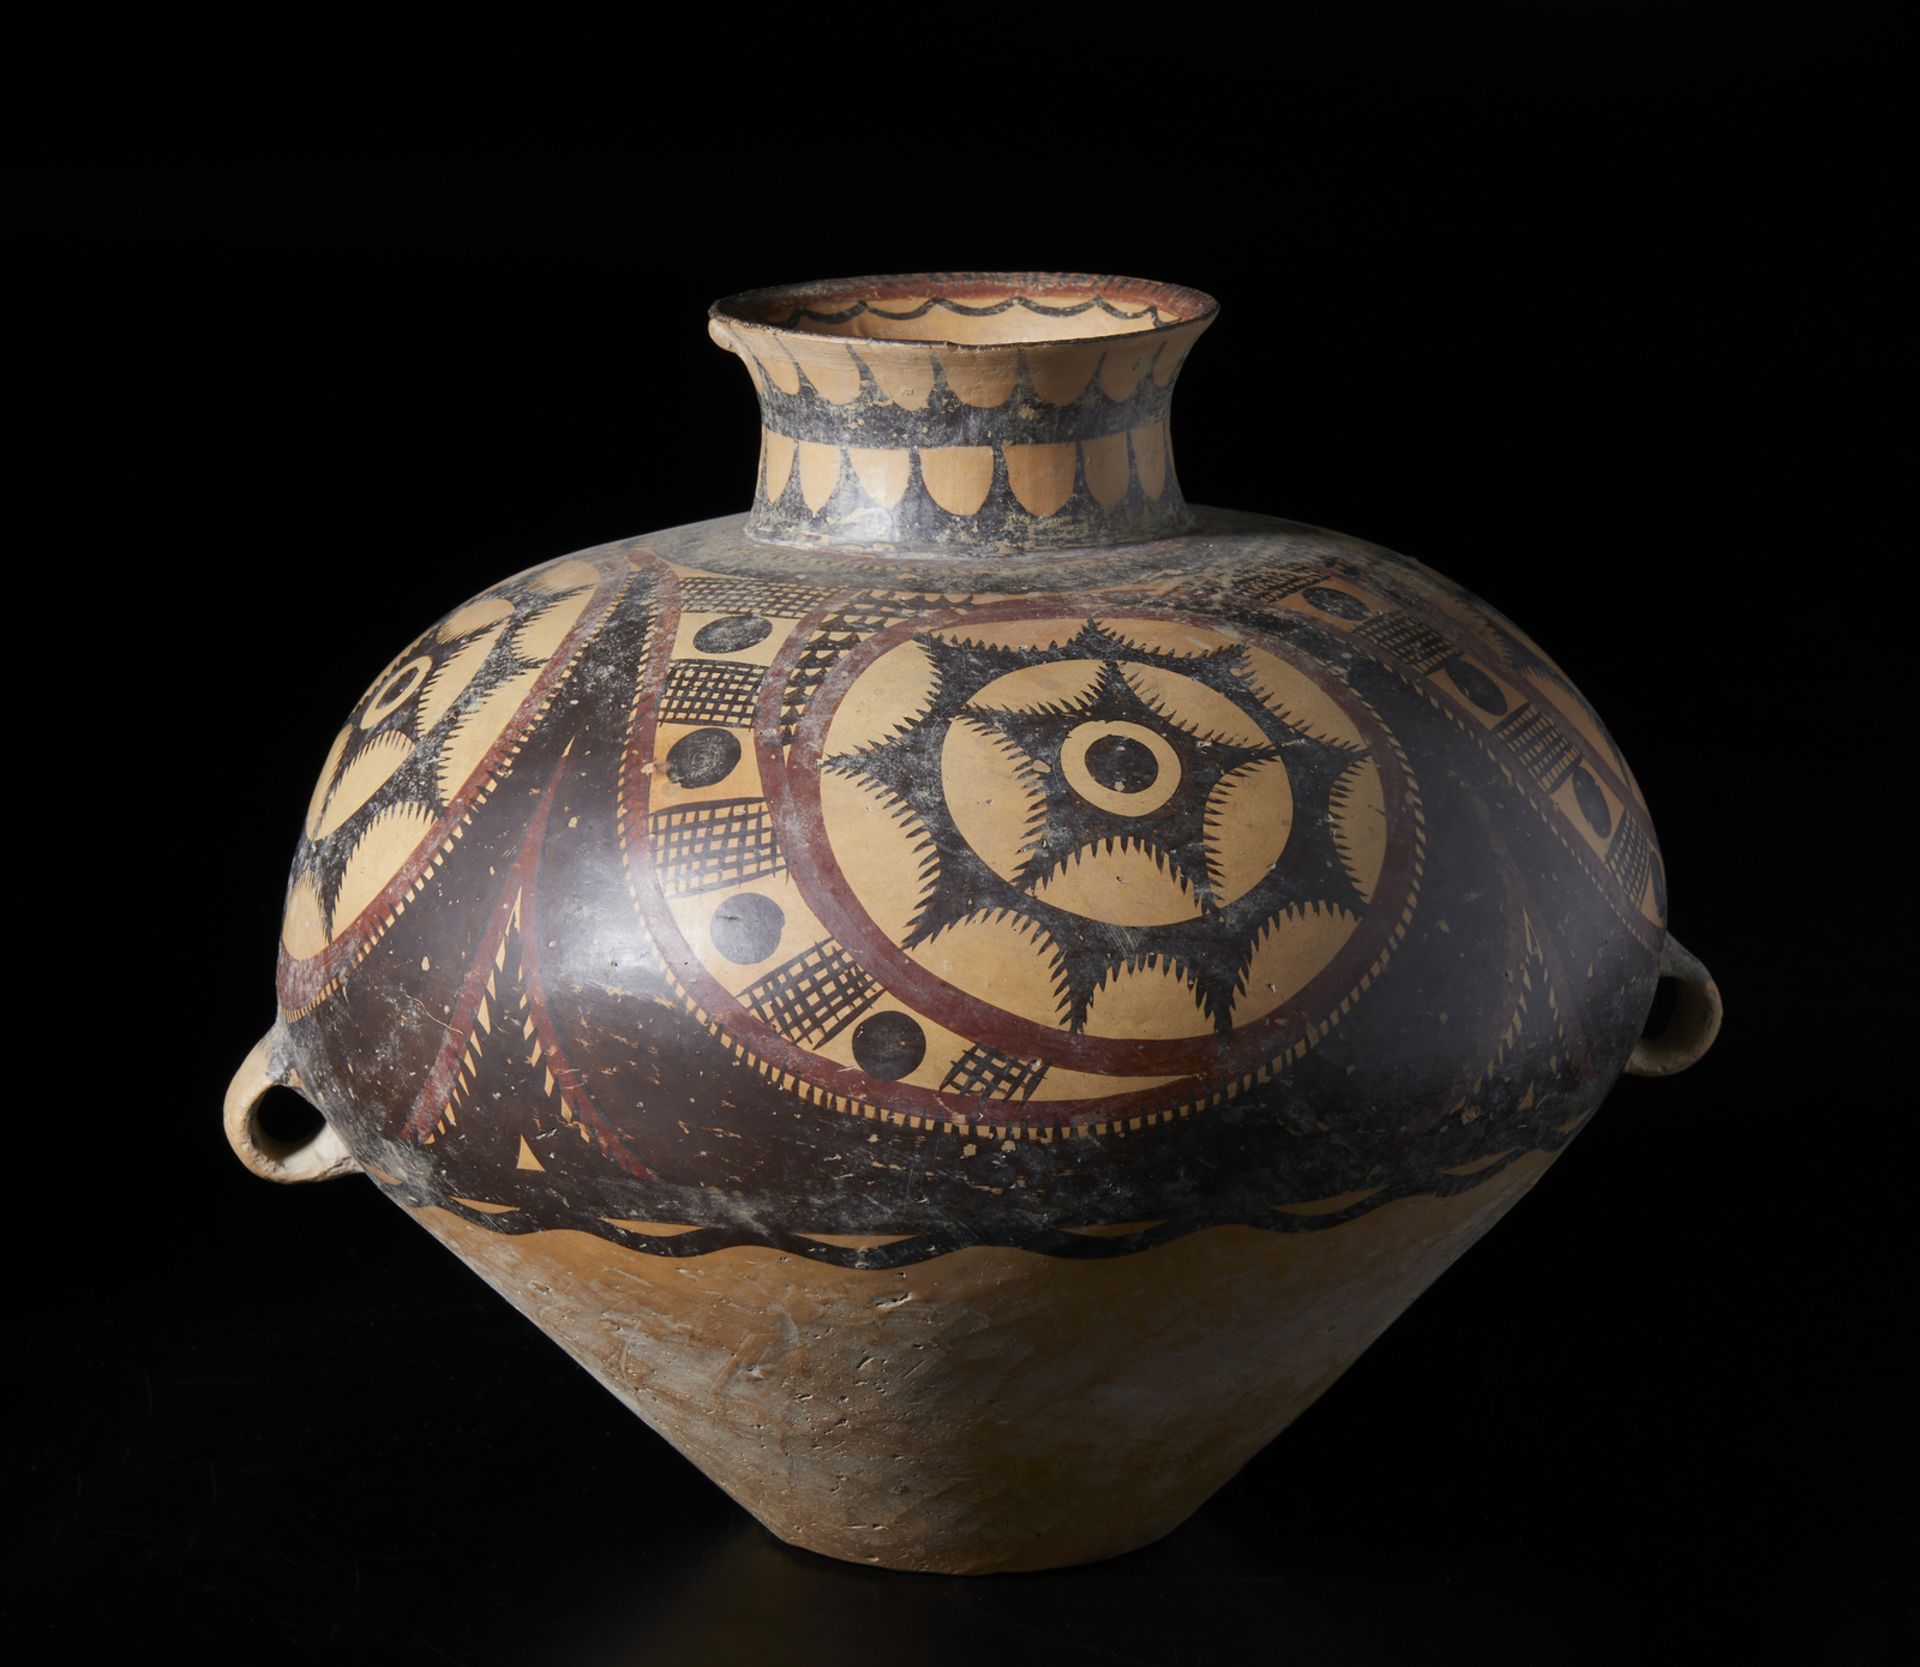 A fine polichrome earthenware jar China, Yangshao culture, 5th-6th millenium bCCm 37,50 x 32,00 - Image 3 of 5